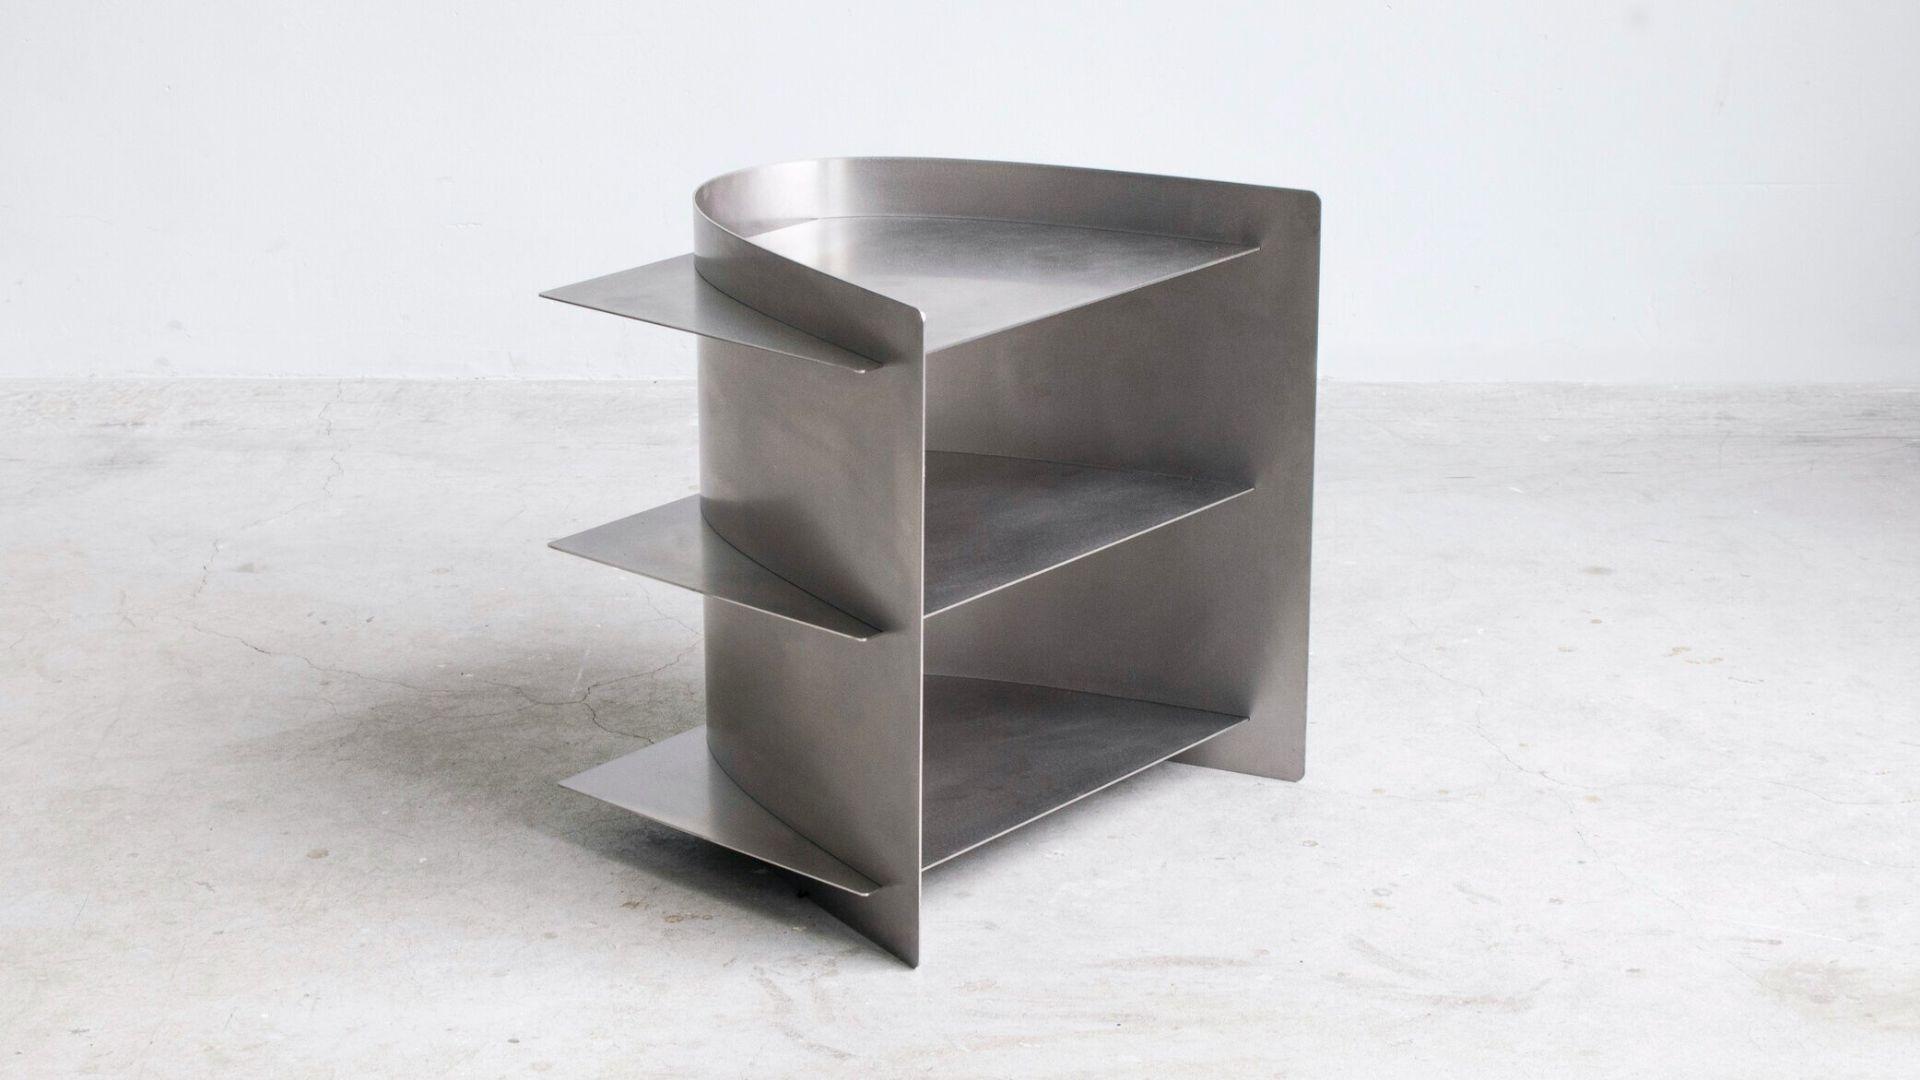 Paul Coenen folds single sheet of steel to form furniture pieces